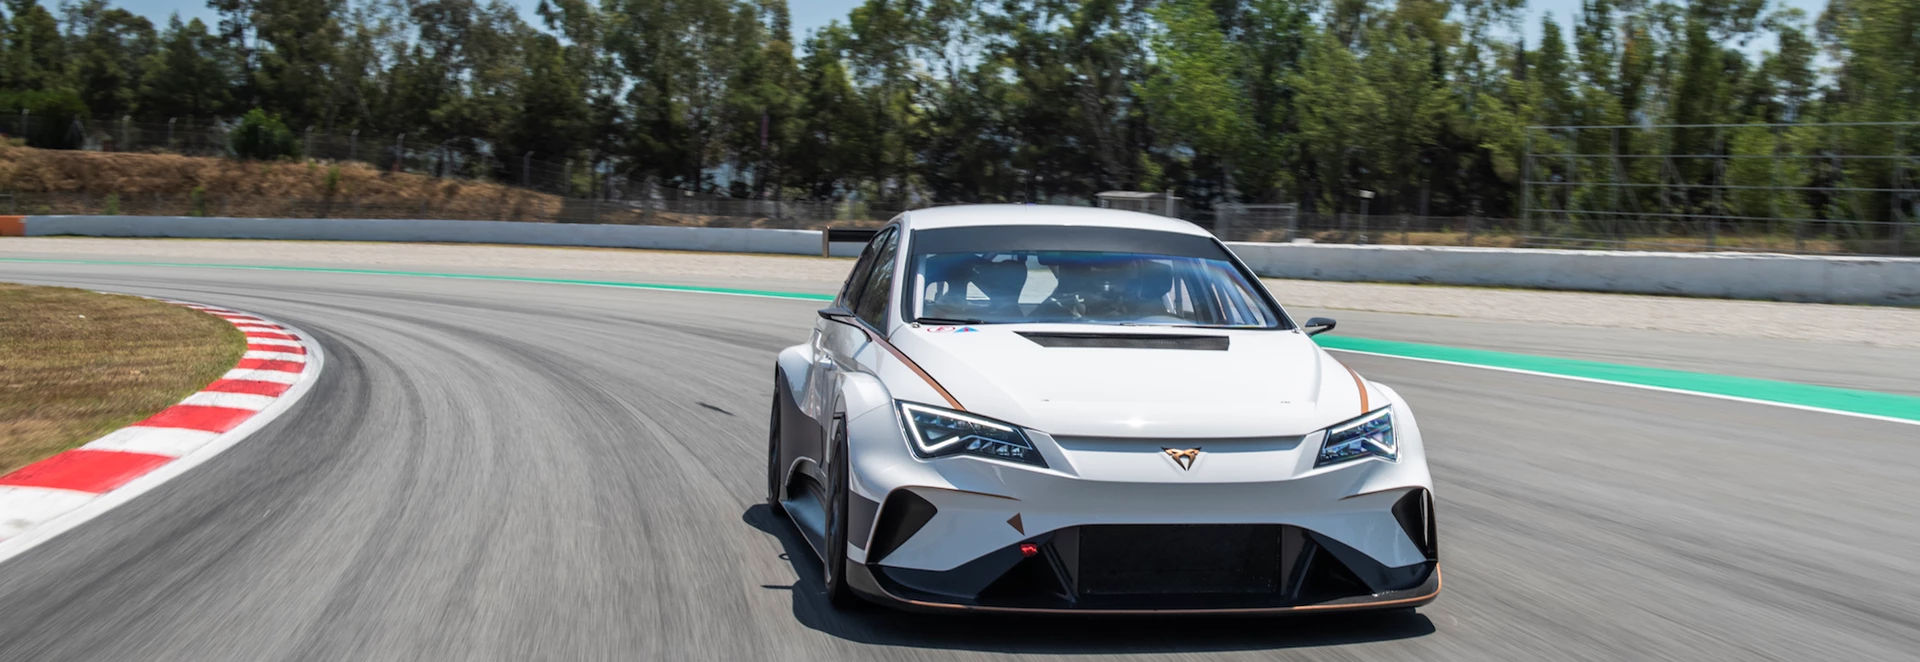 Cupra takes its first fully-electric touring car to the track…